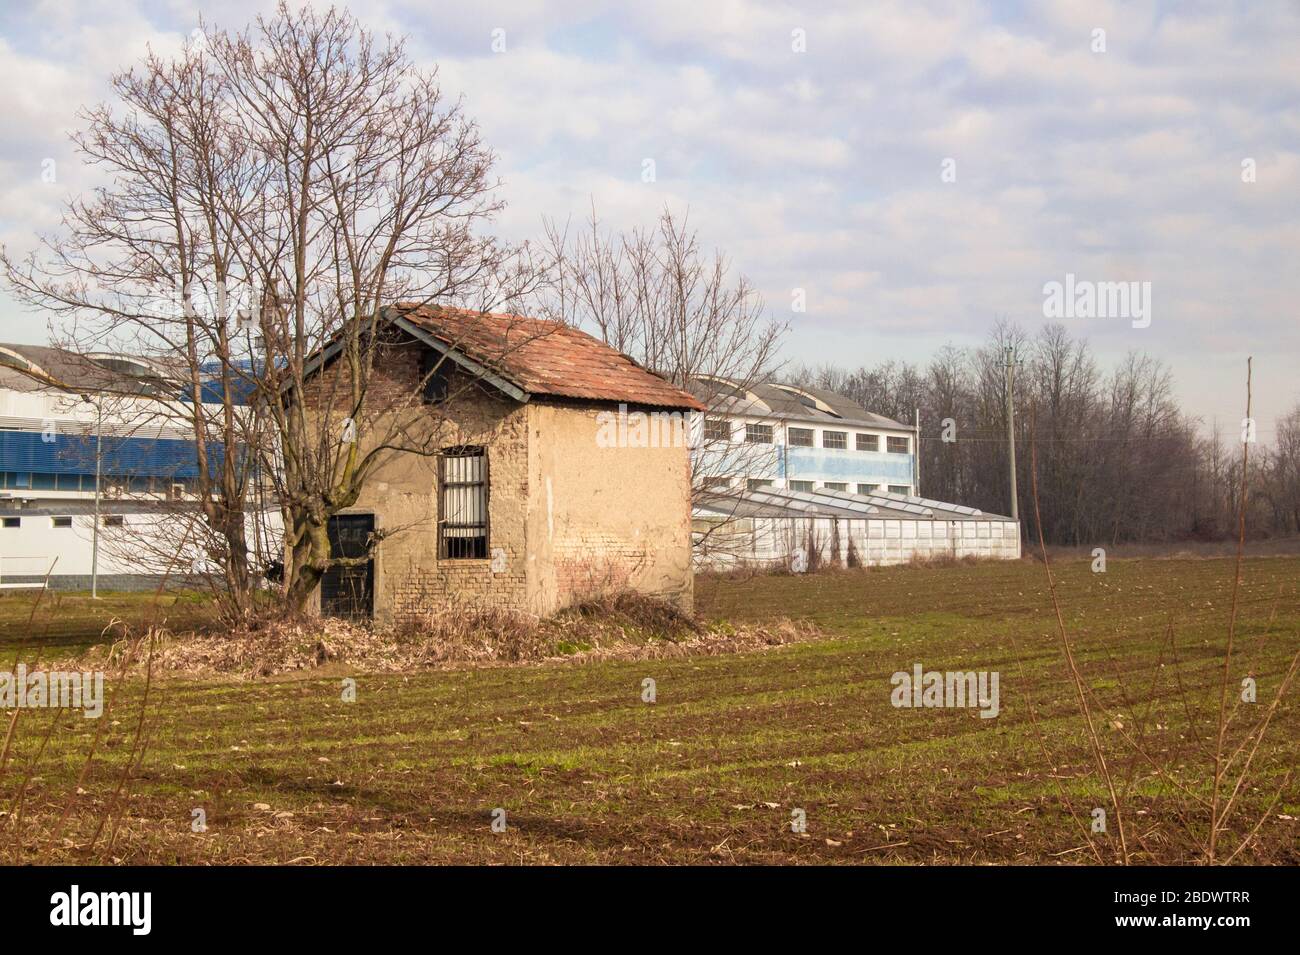 shed of a large factory on the edge of an agricultural field with an old peasant house Stock Photo